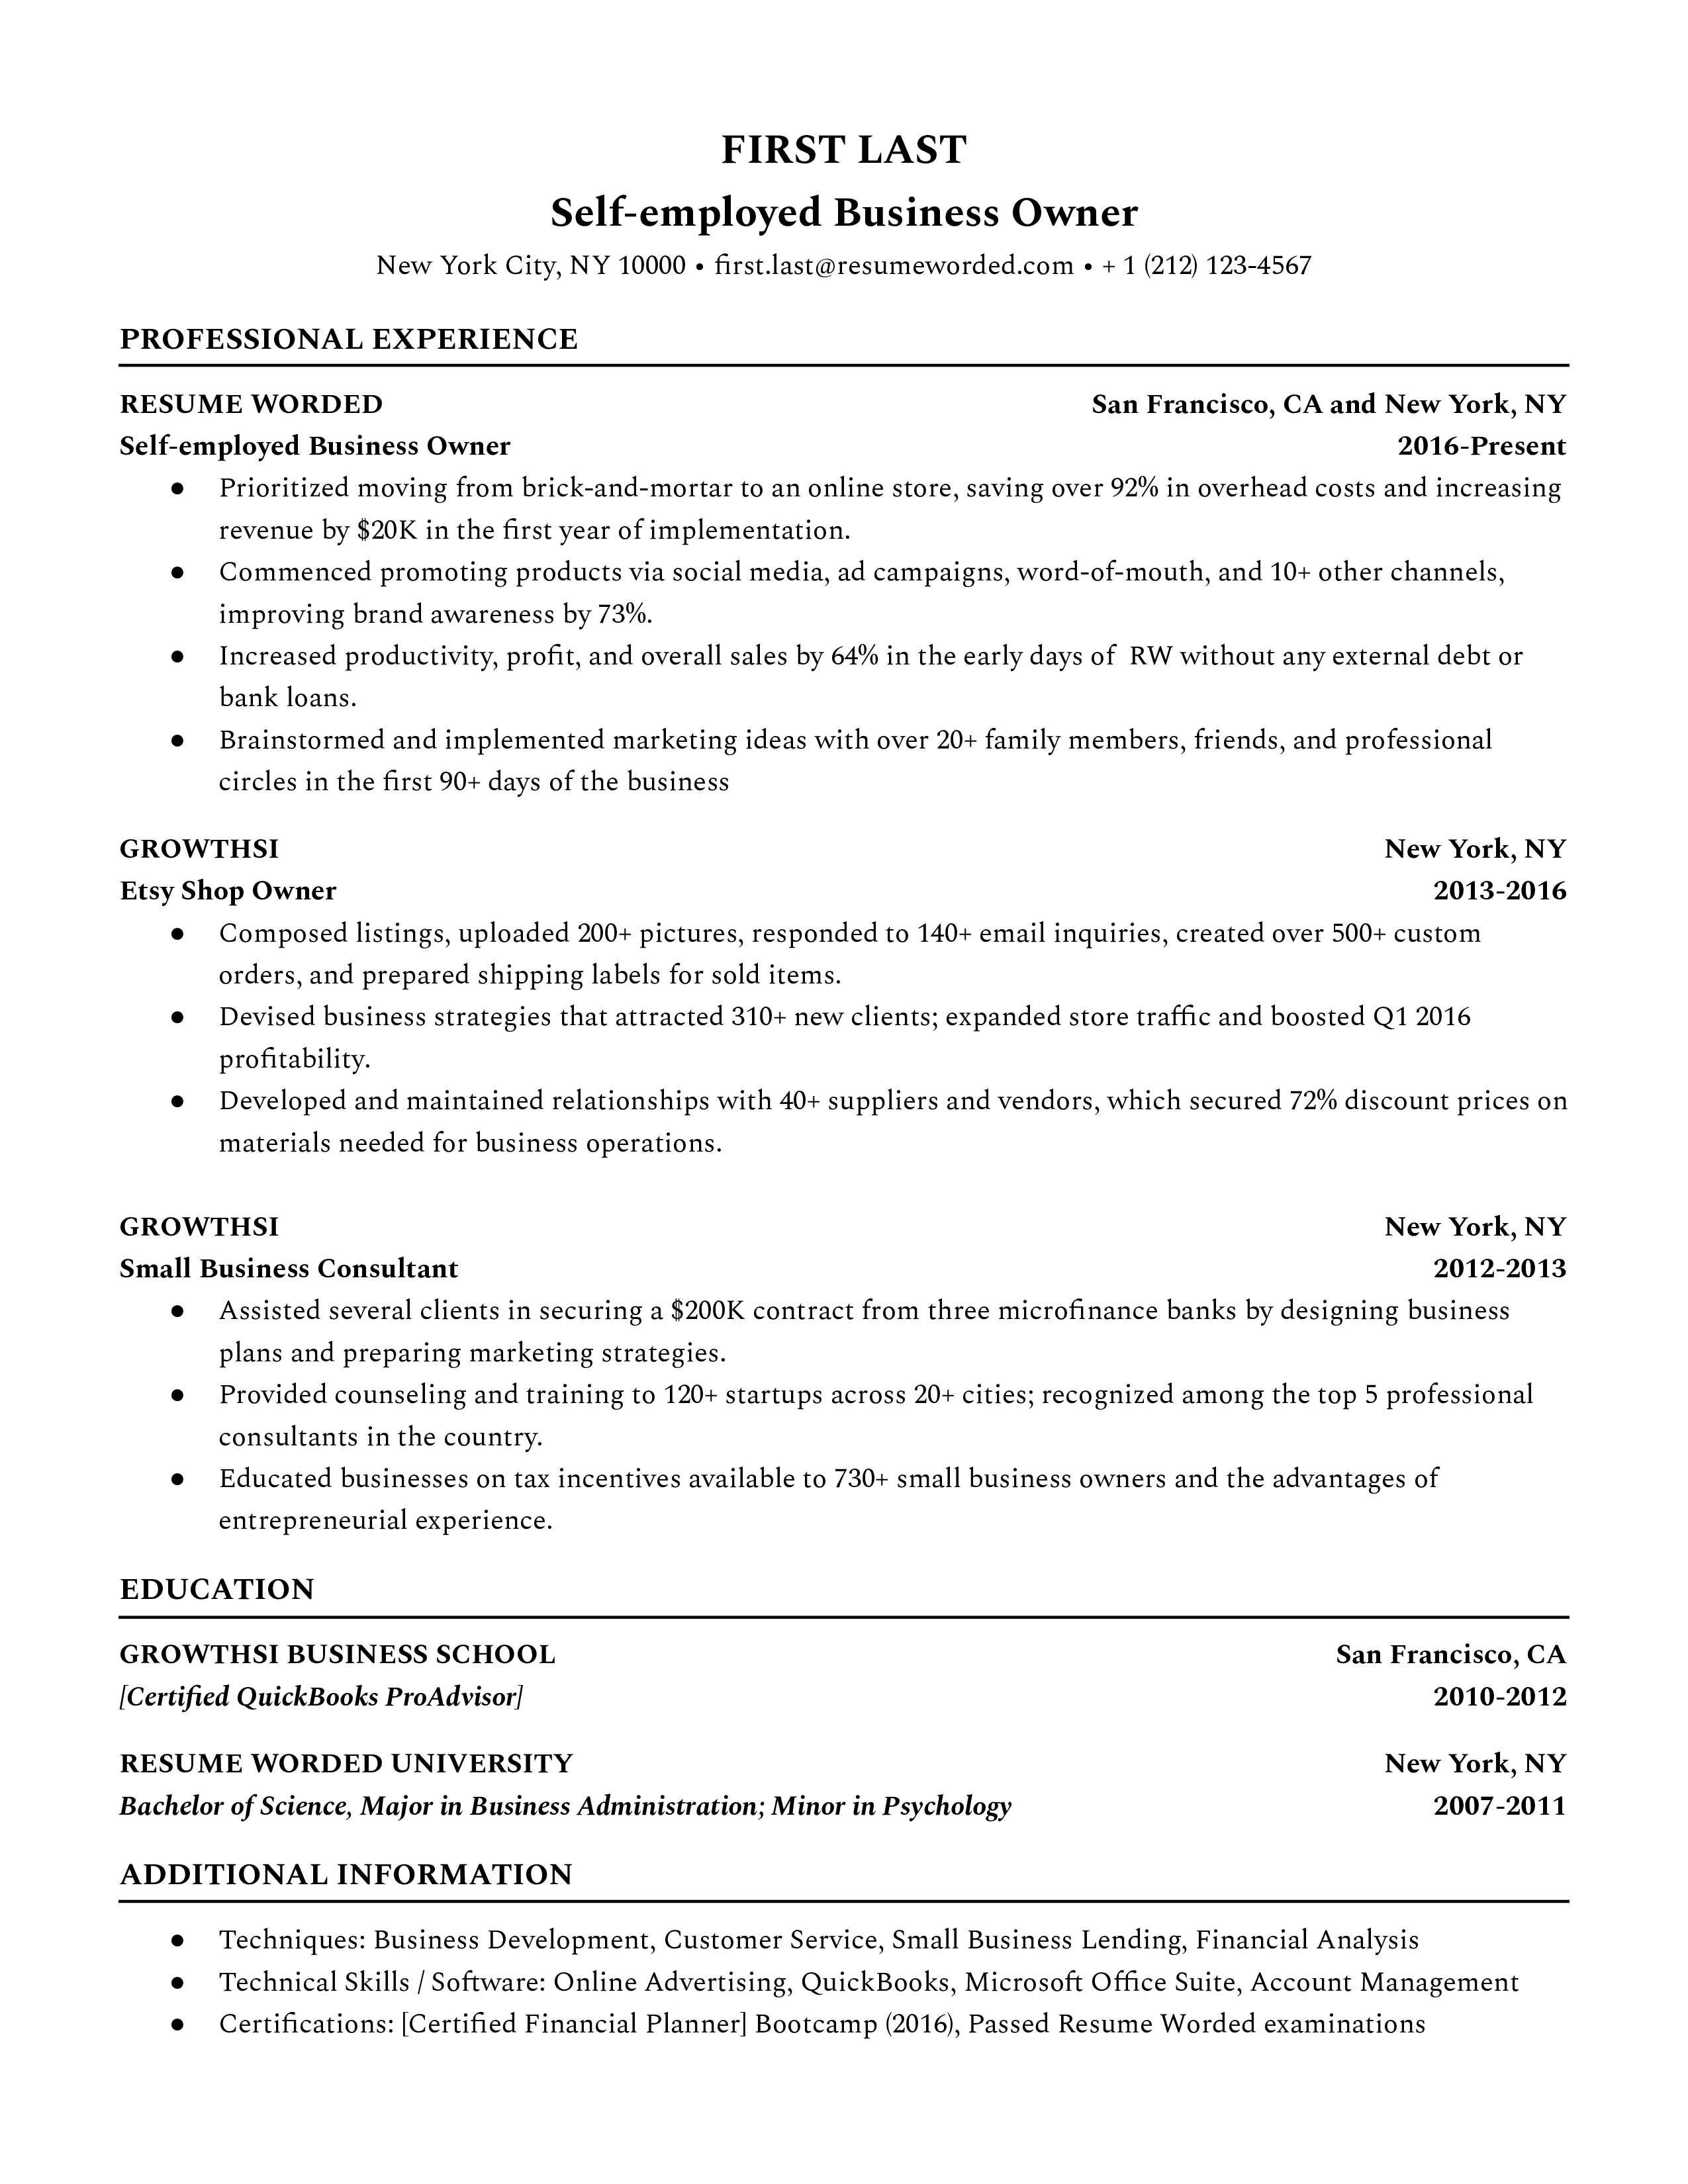 A self-employed business owner resume template including business certifications.